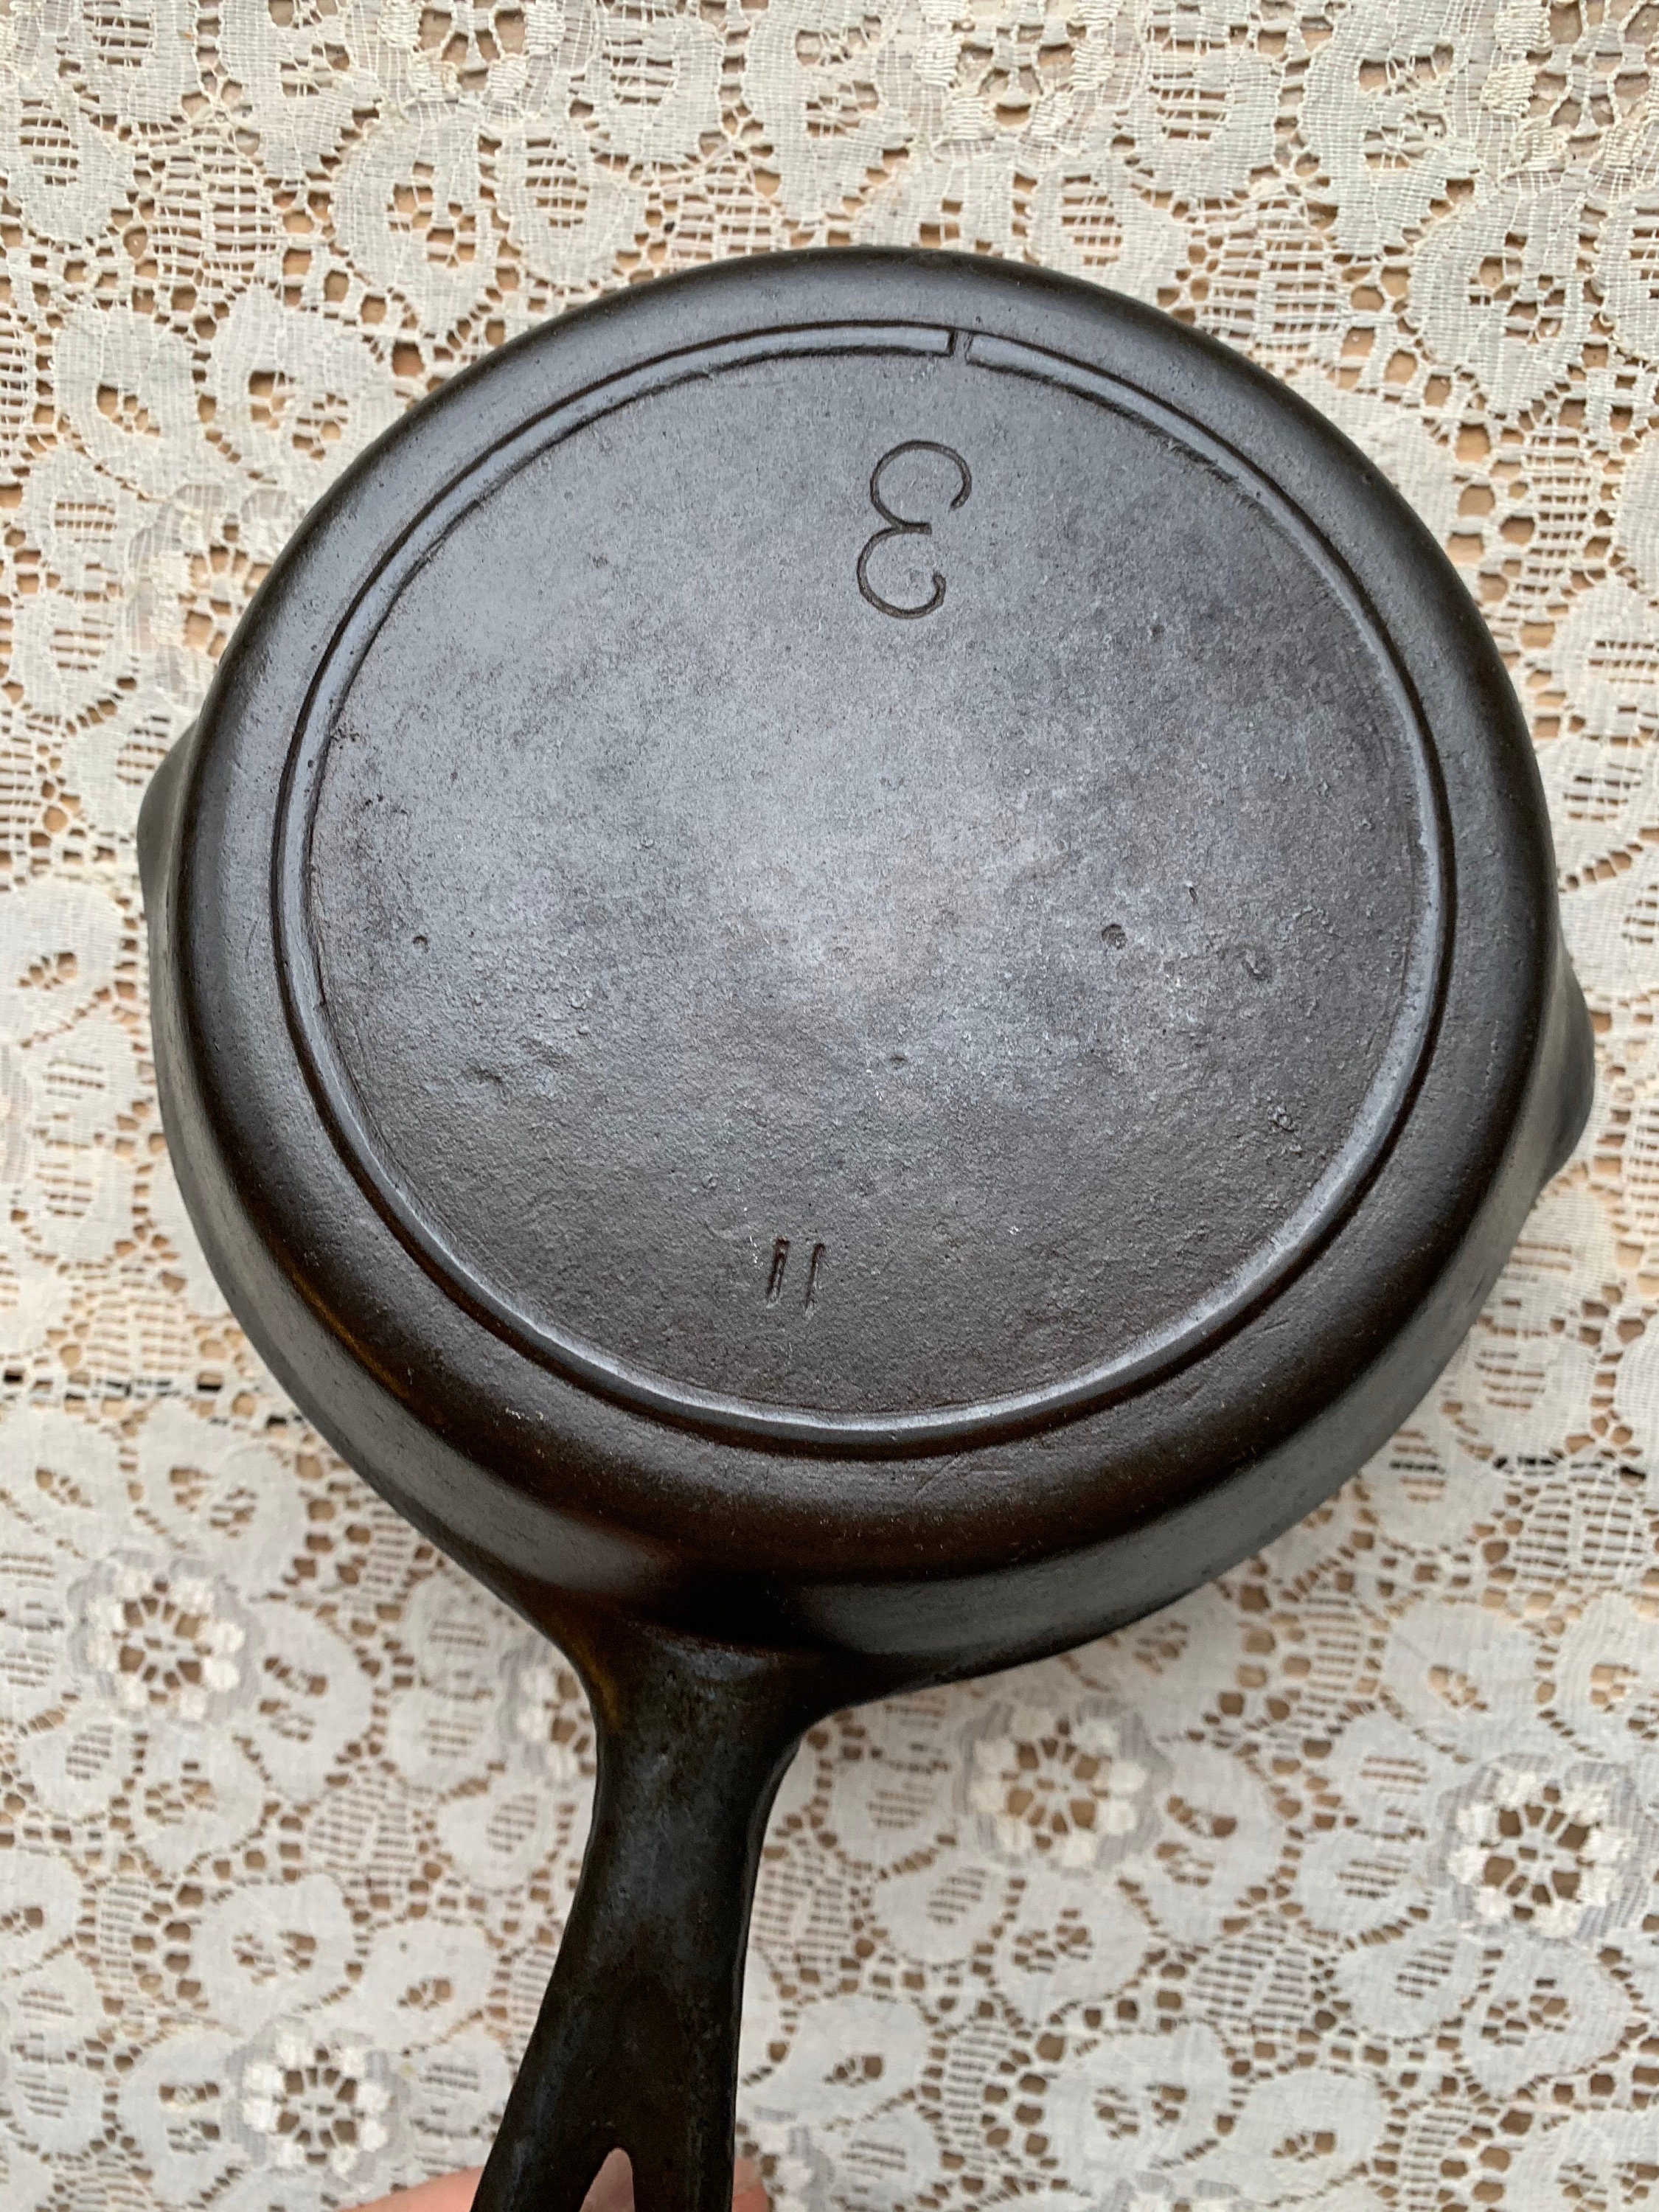 Number 3 Lodge 6 Inch Cast Iron Skillet 3 Notch Double Spout RESTORED